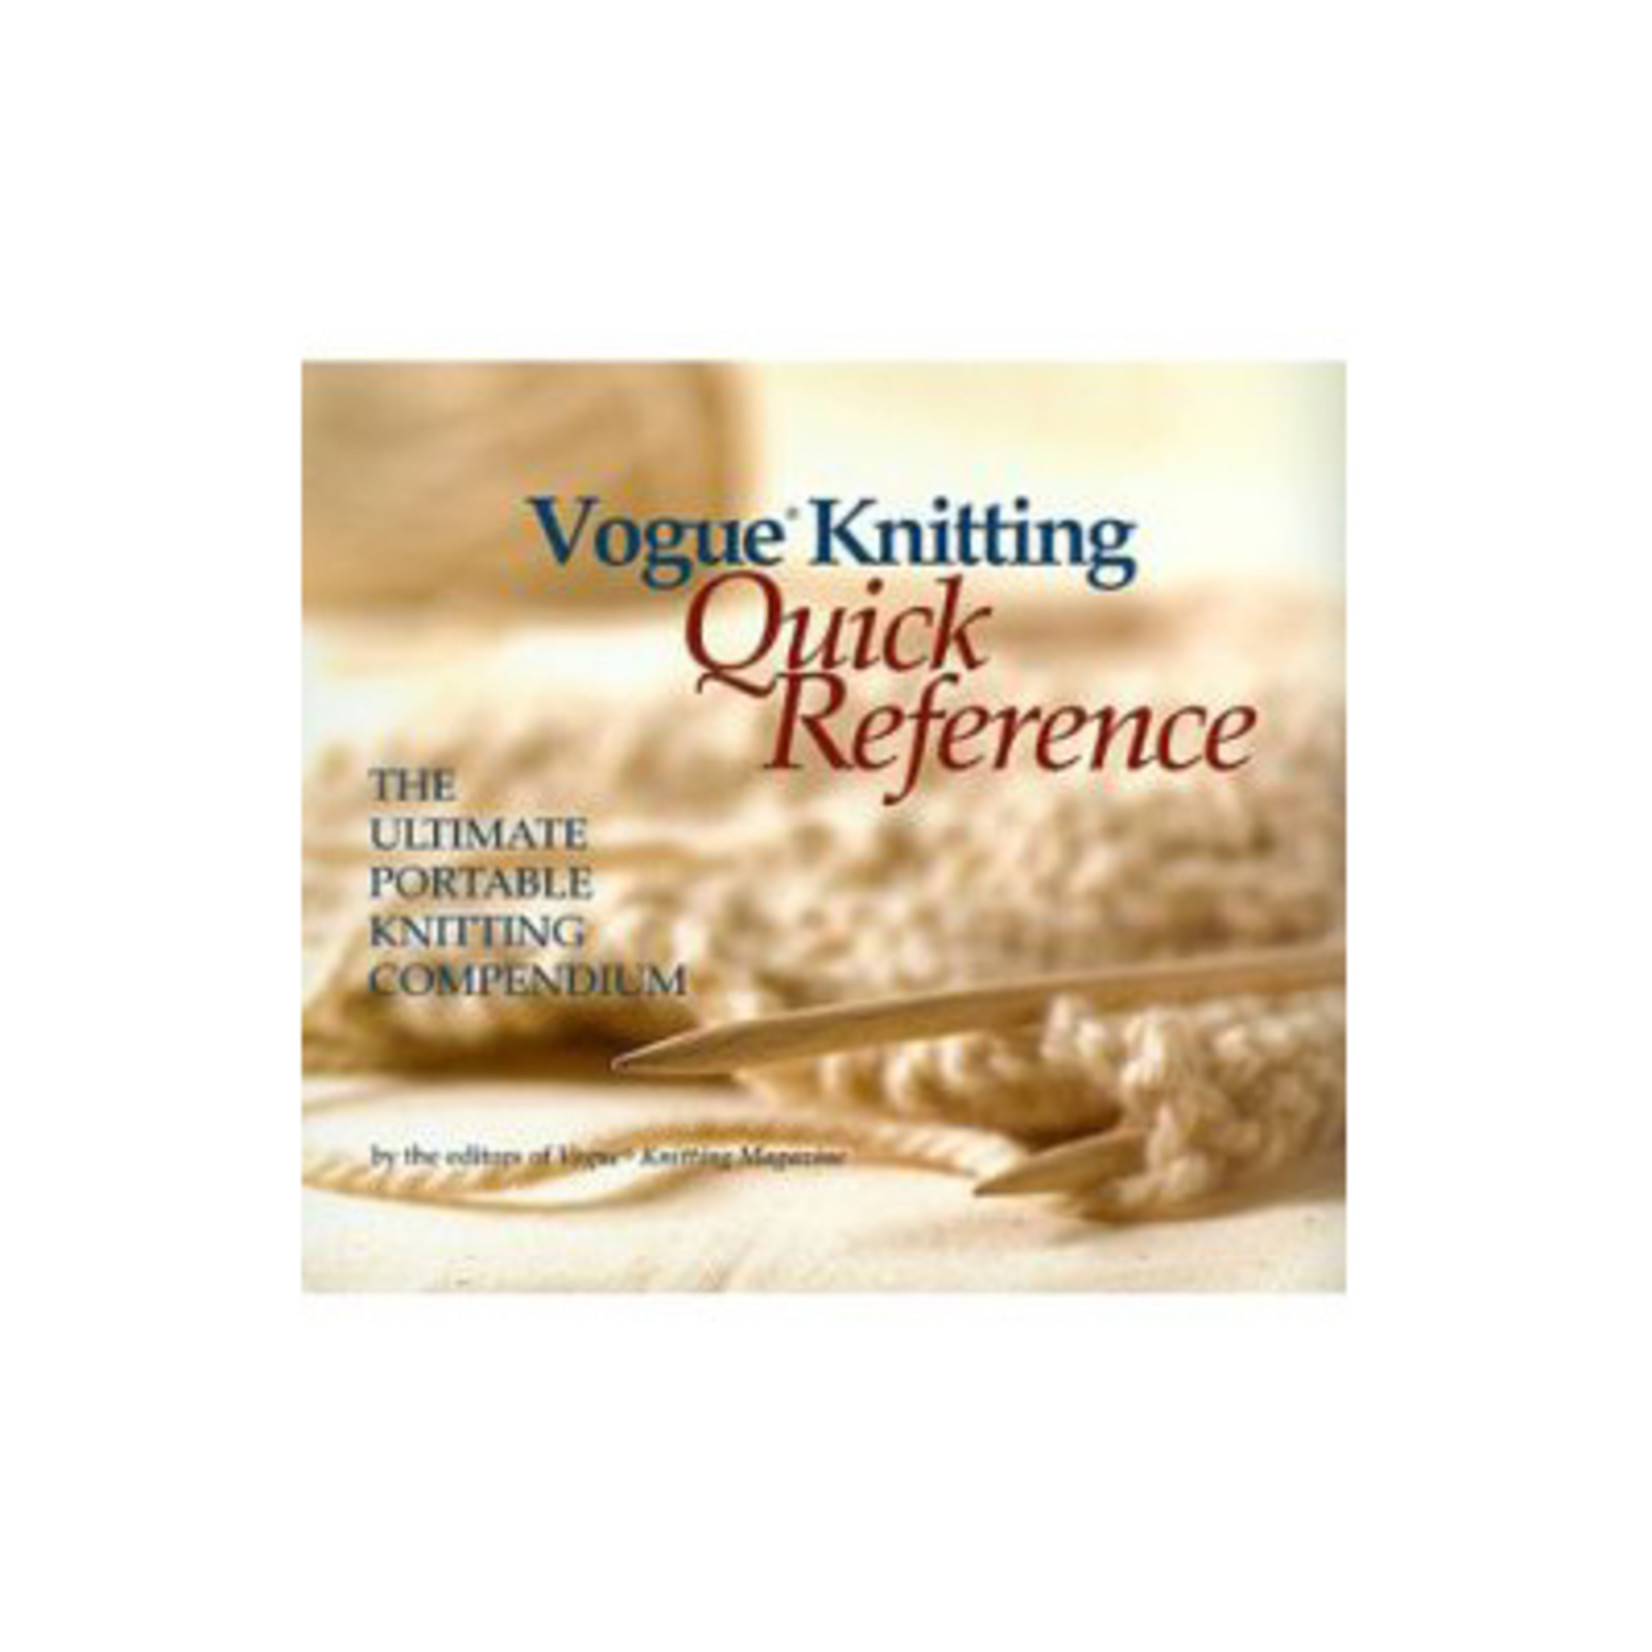 Vogue Knitting Vogue Knitting: Quick Reference